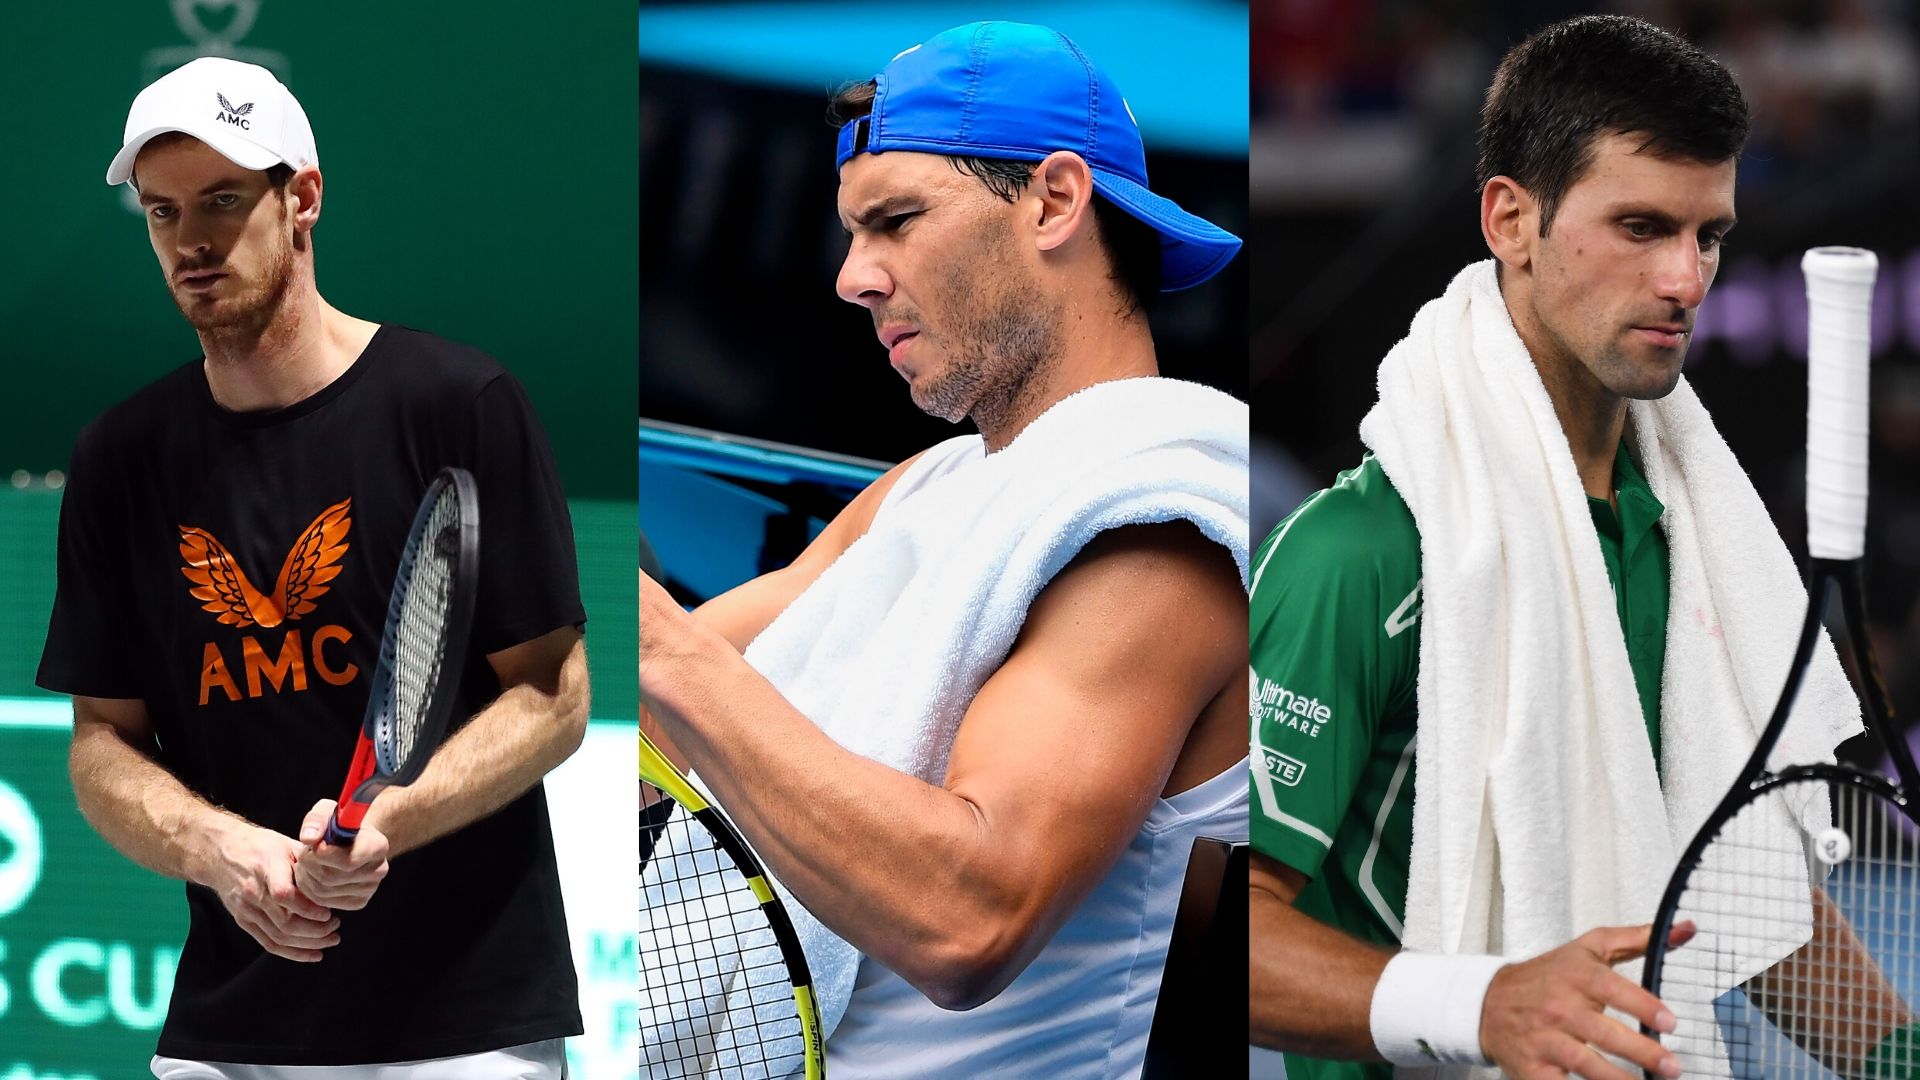 Rafael Nadal spoke about some of his rivalries on Instagram